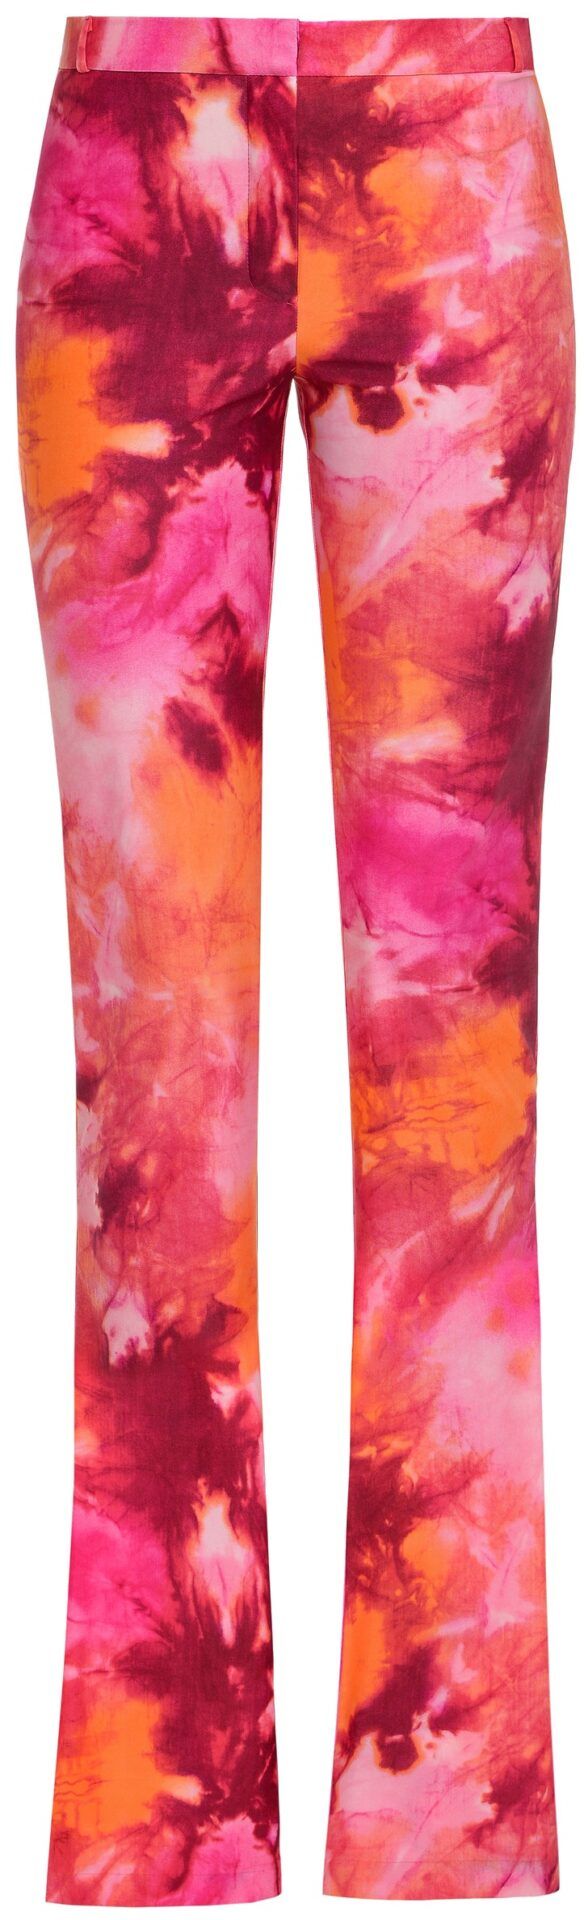 Pants (Pink Ombre Print) | style